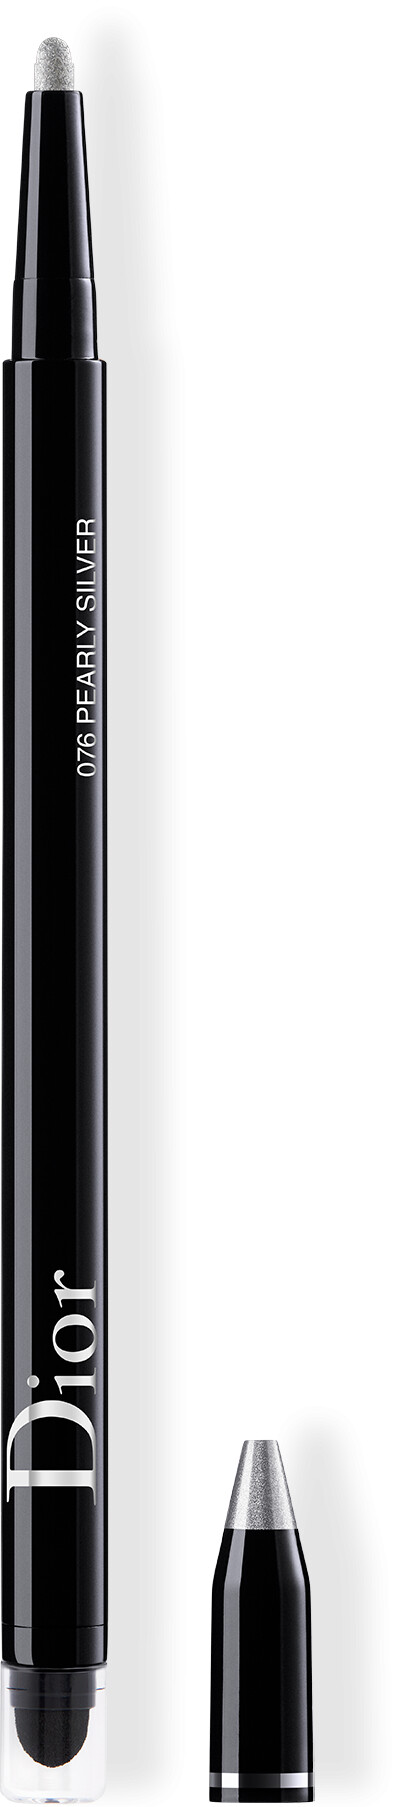 DIOR Diorshow 24hr Stylo Eyeliner 0.2g 076 - Pearly Silver